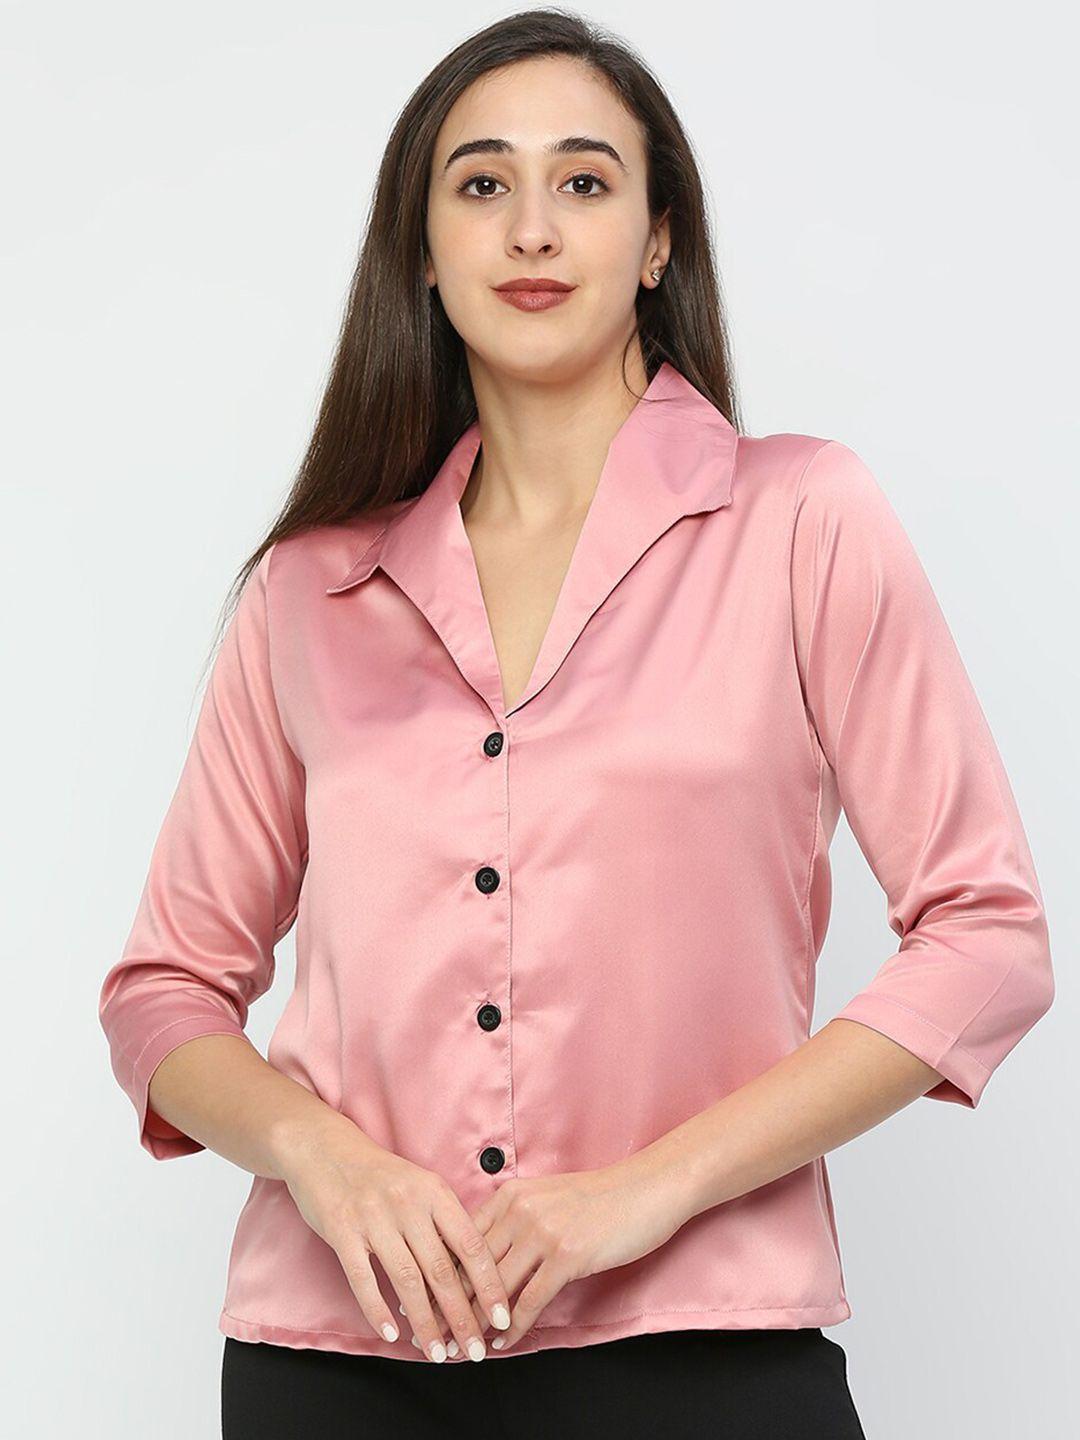 smarty pants women relaxed casual satin shirt